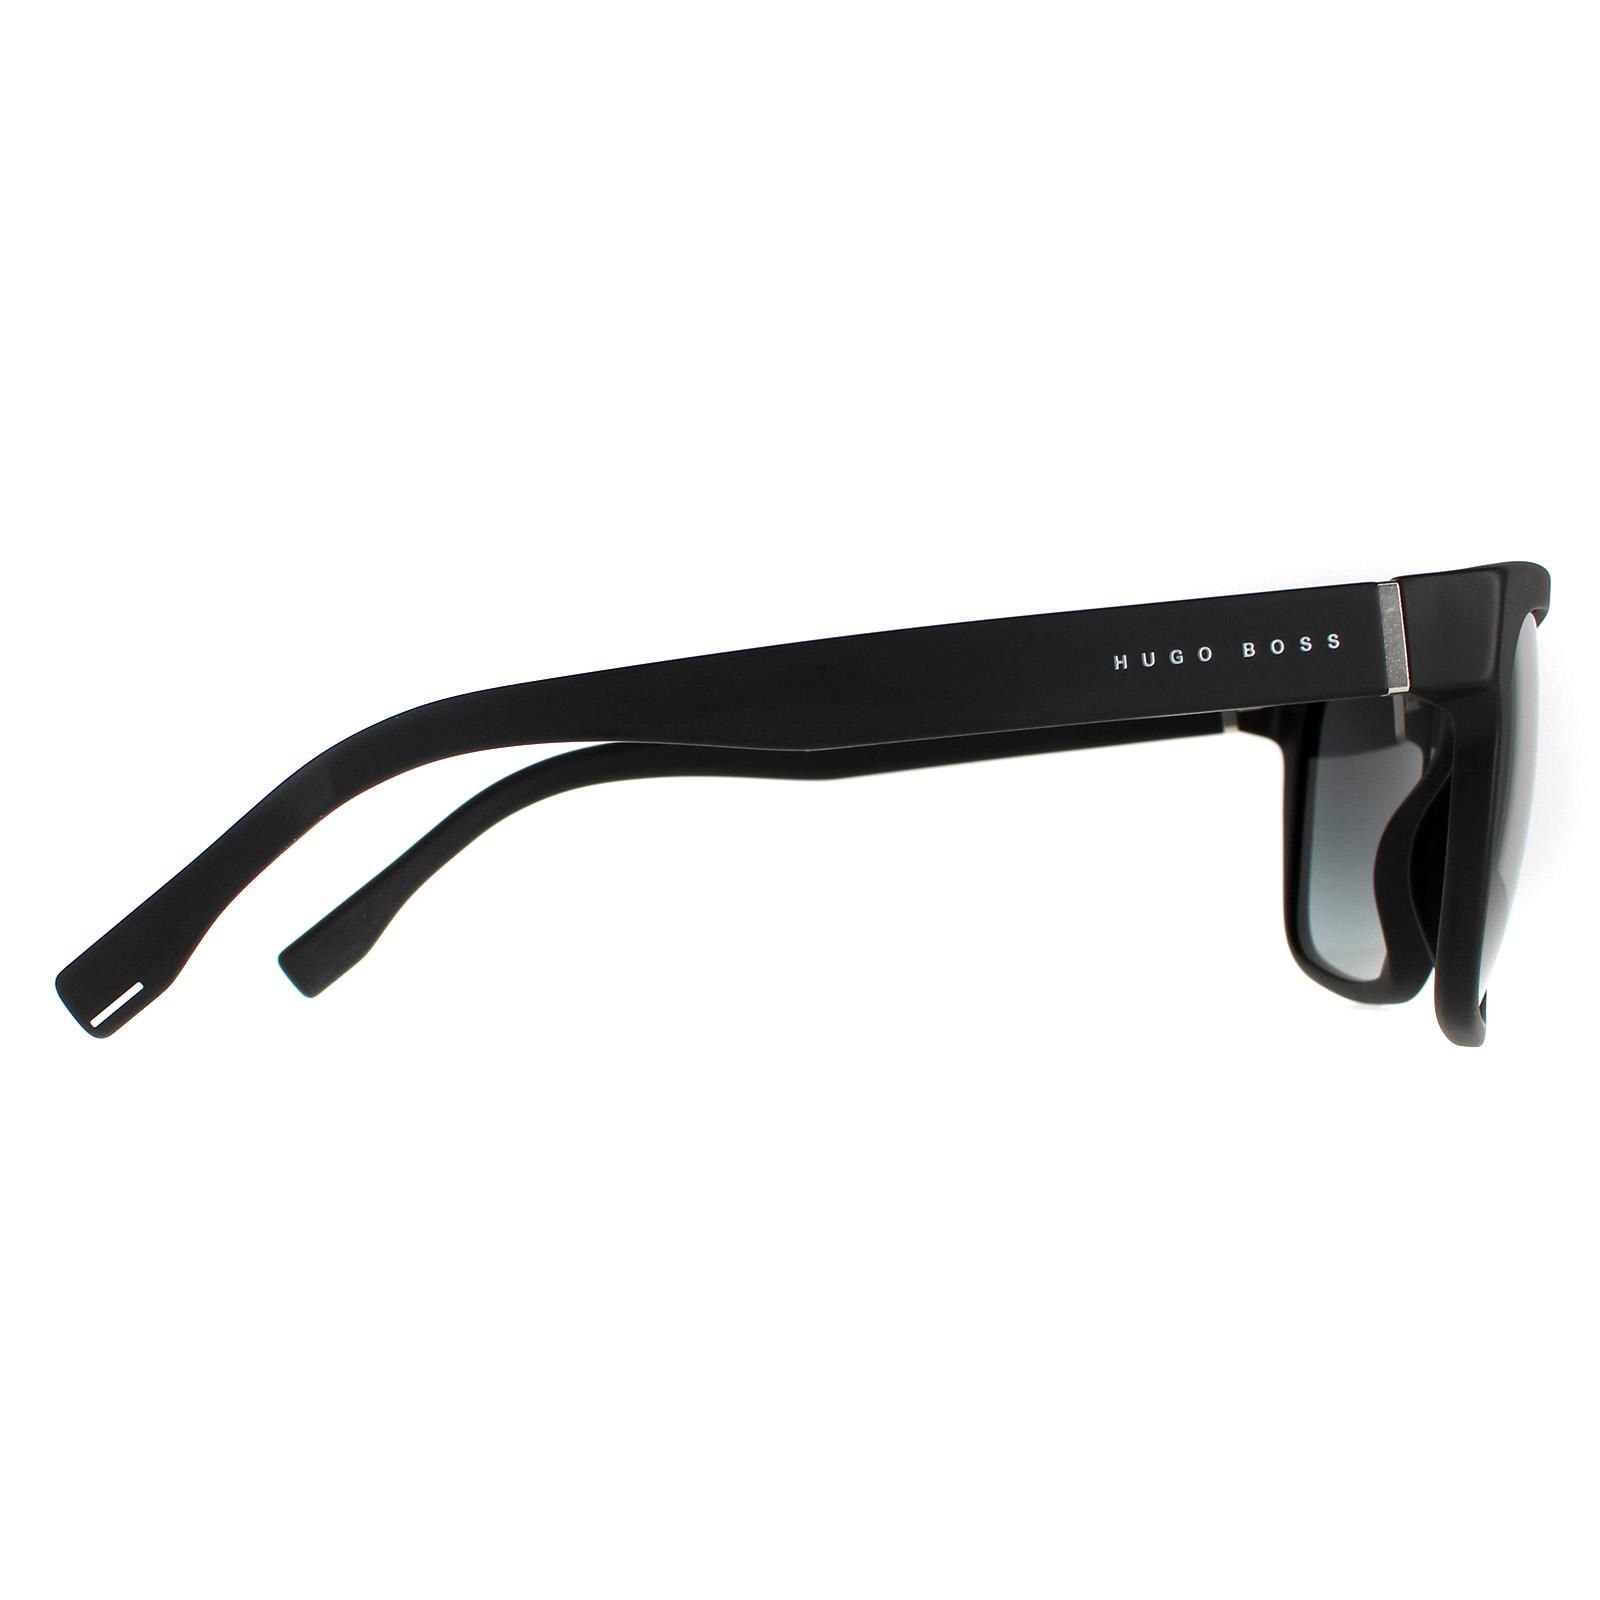 Hugo Boss Rectangle Mens Matte Black Dark Grey Gradient BOSS 0727/S/IT  Hugo Boss are a high quality modern style from Hugo Boss with a square shape but with enough curve to the front to hug the face nicely. A small Hugo Boss logo appears on the temples for that brand assurance.